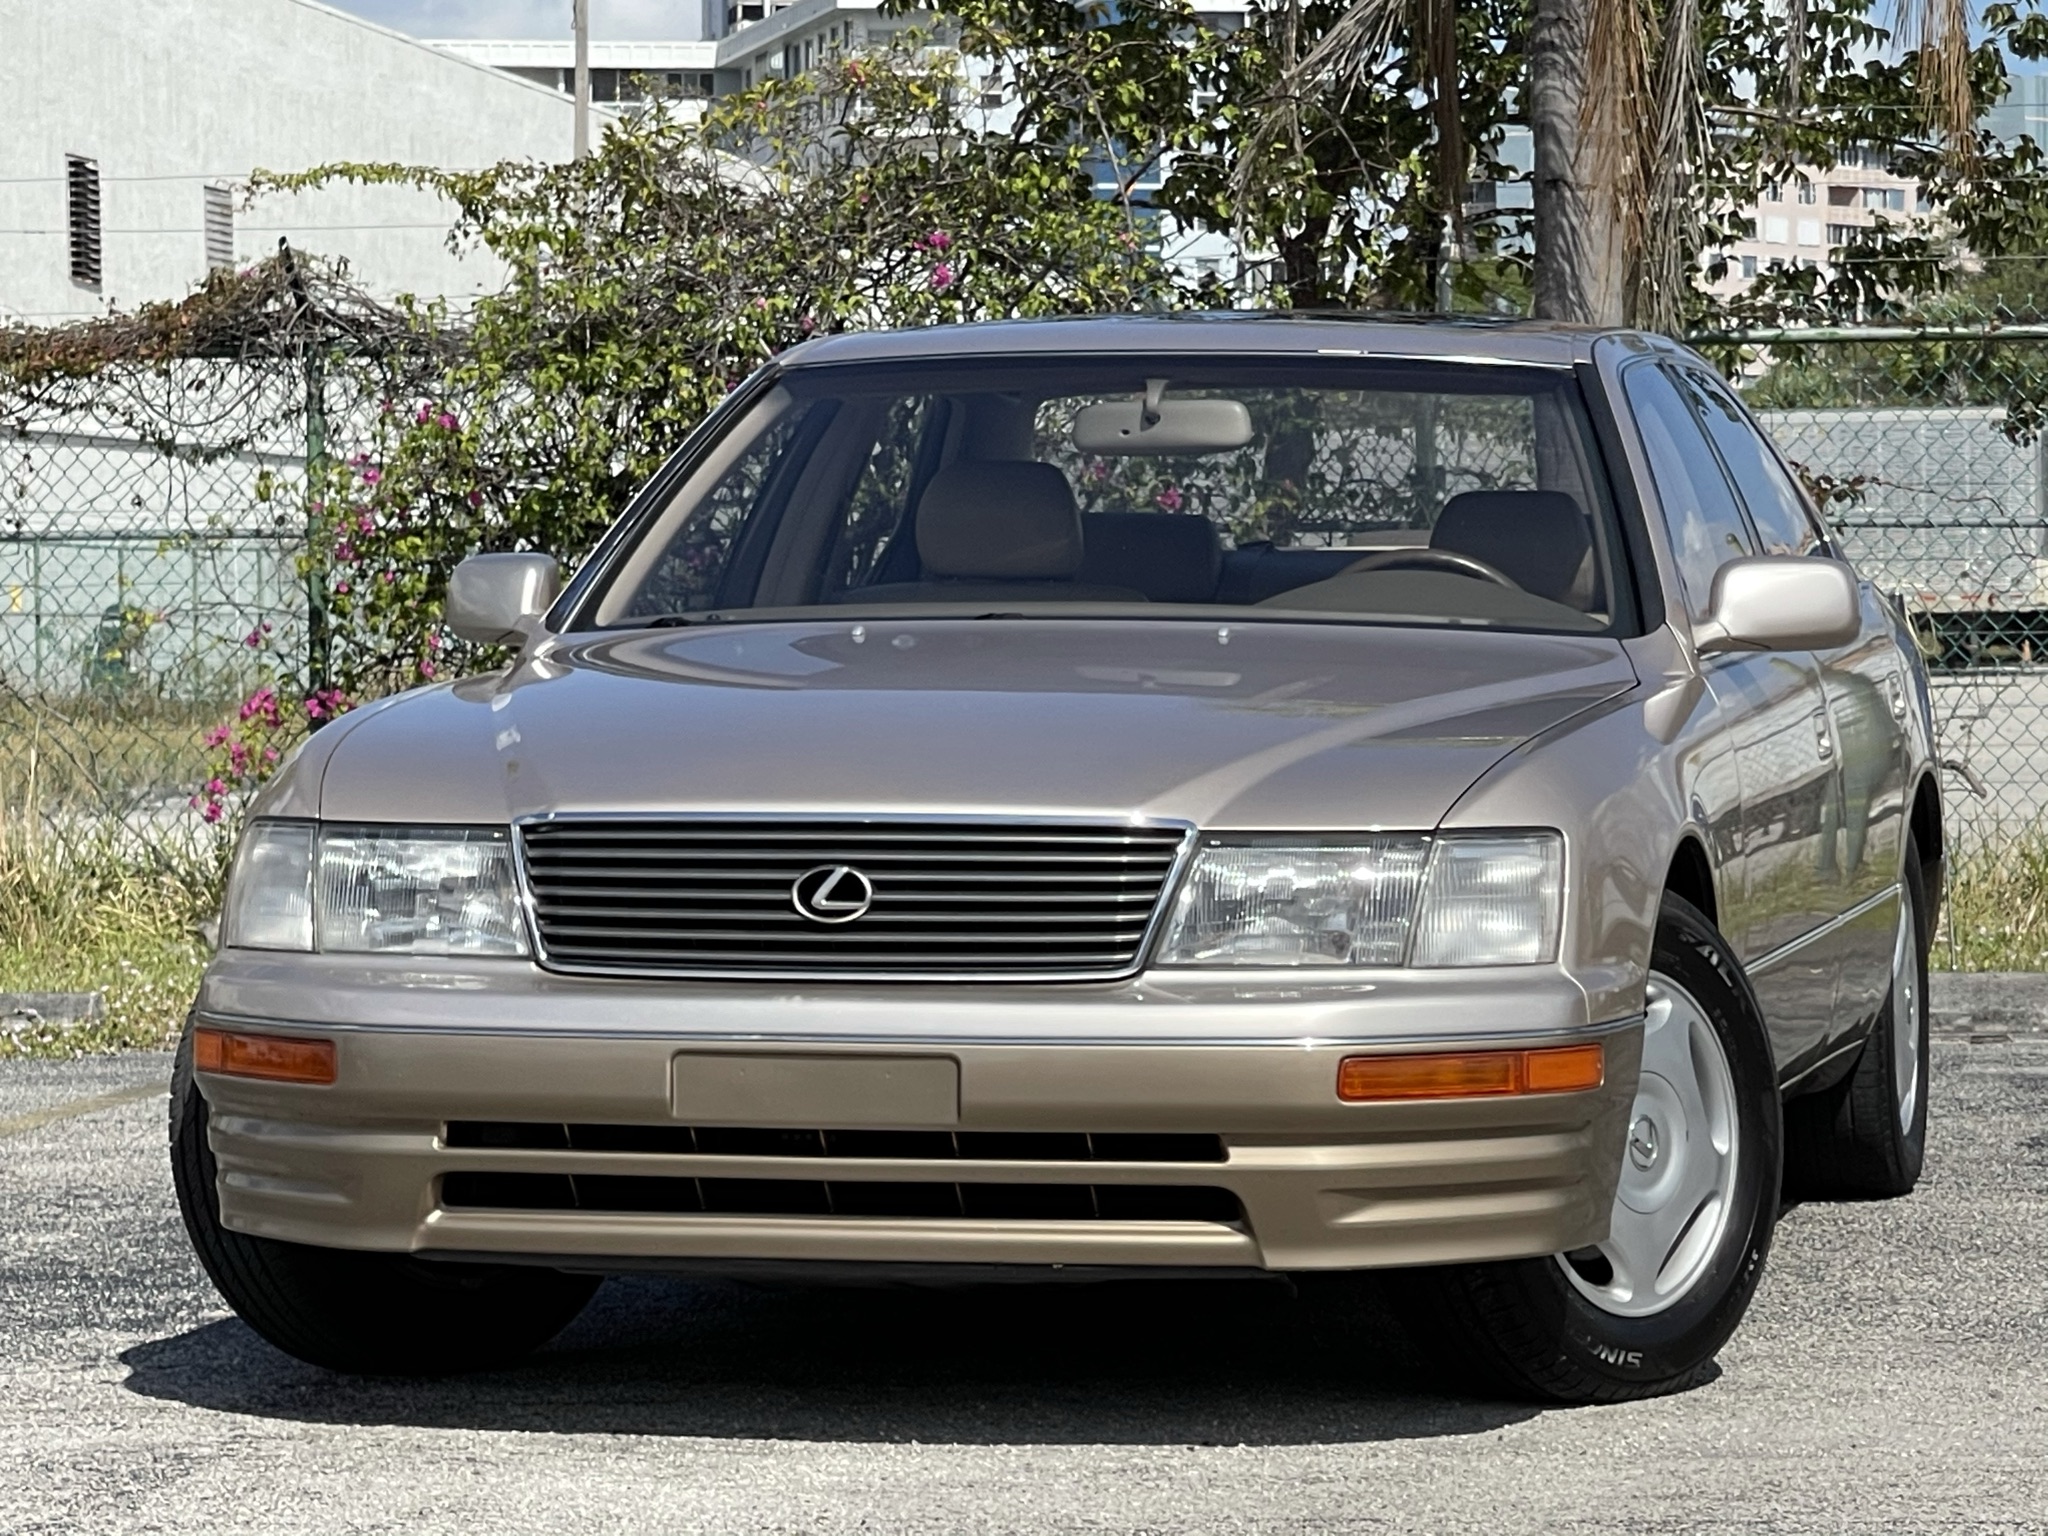 Buy Used 1997 LEXUS LS400 COACH EDITION for $9 900 from trusted dealer in  Brooklyn, NY!